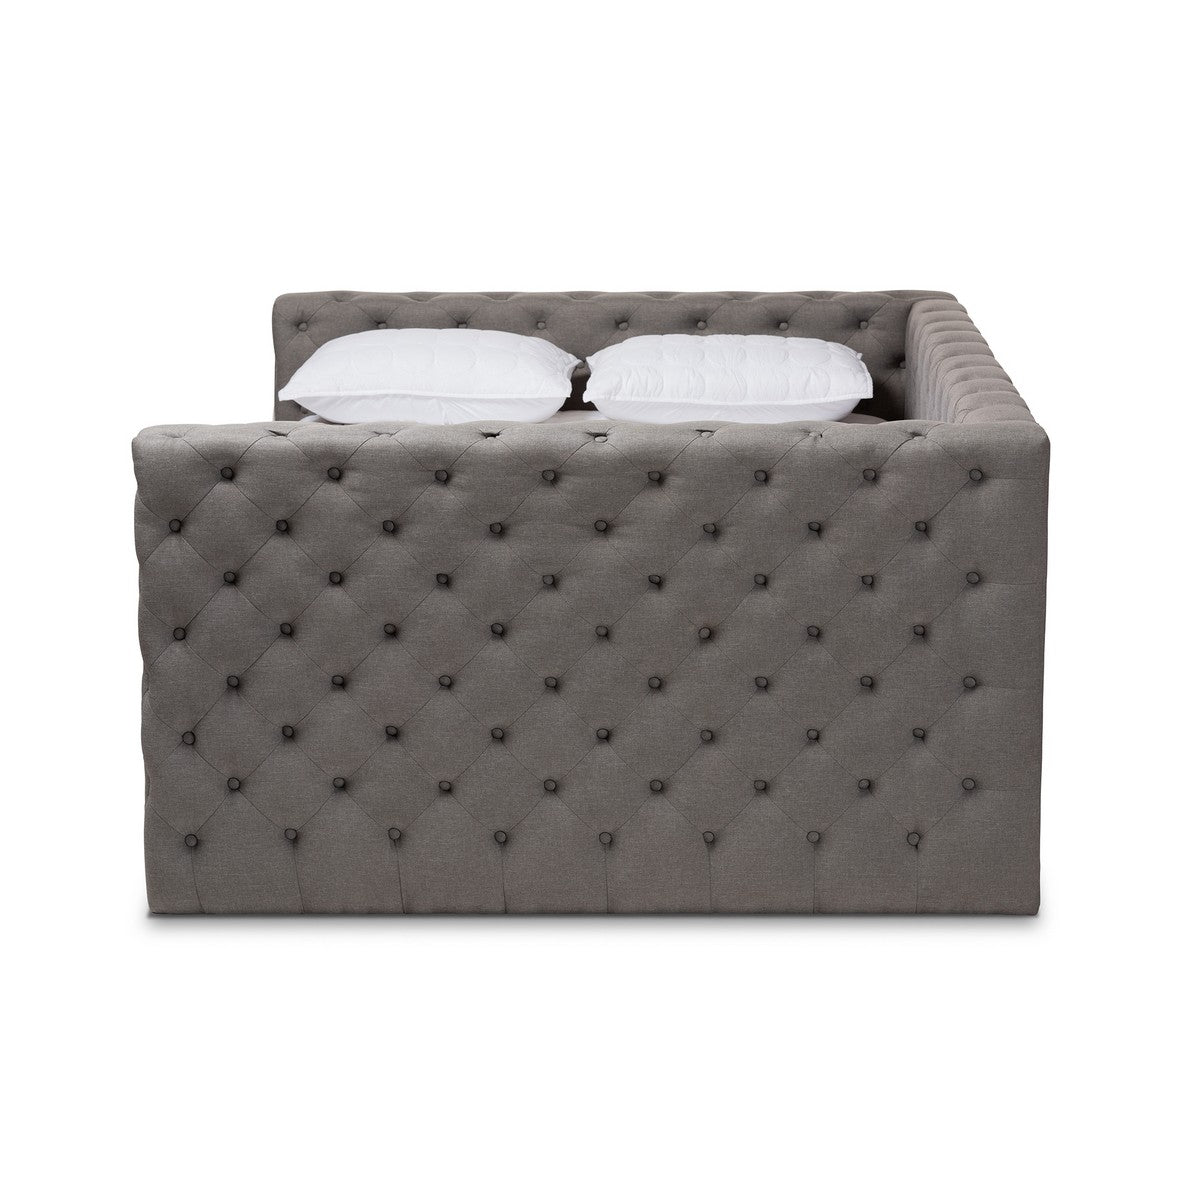 Baxton Studio Anabella Modern and Contemporary Grey Fabric Upholstered Queen Size Daybed